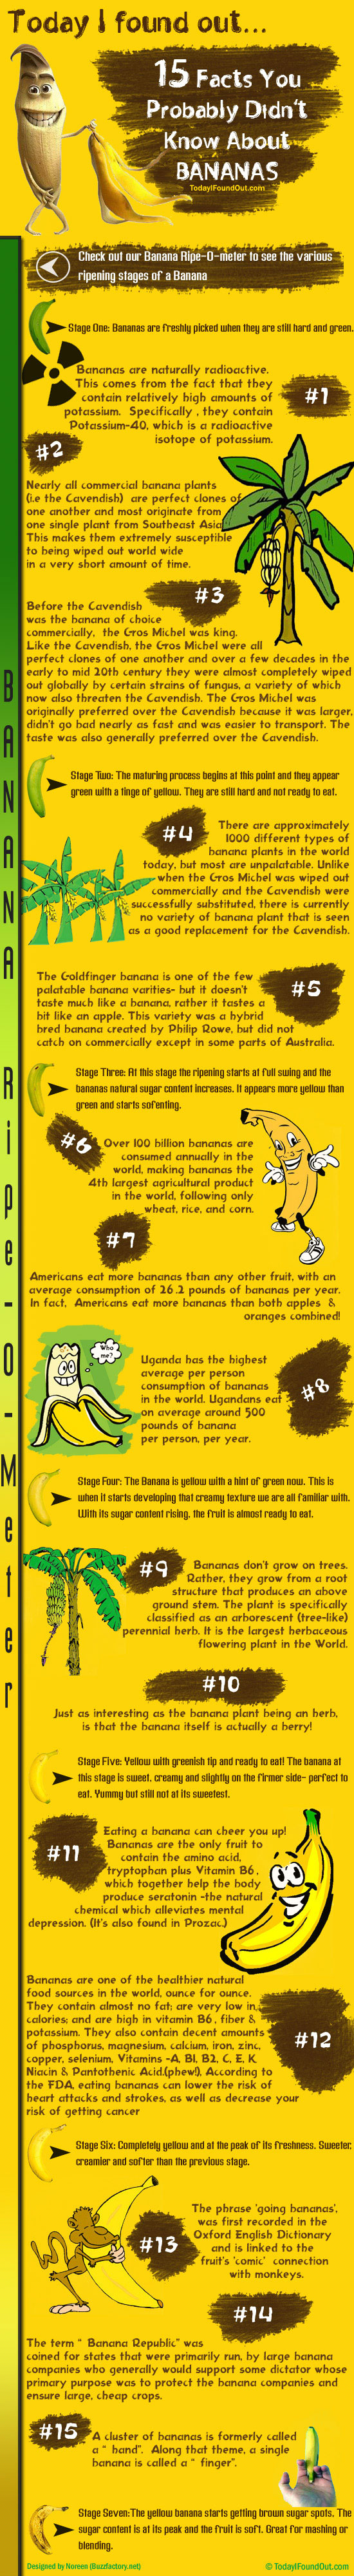 15 Facts You Probably Didn't Know About Bananas